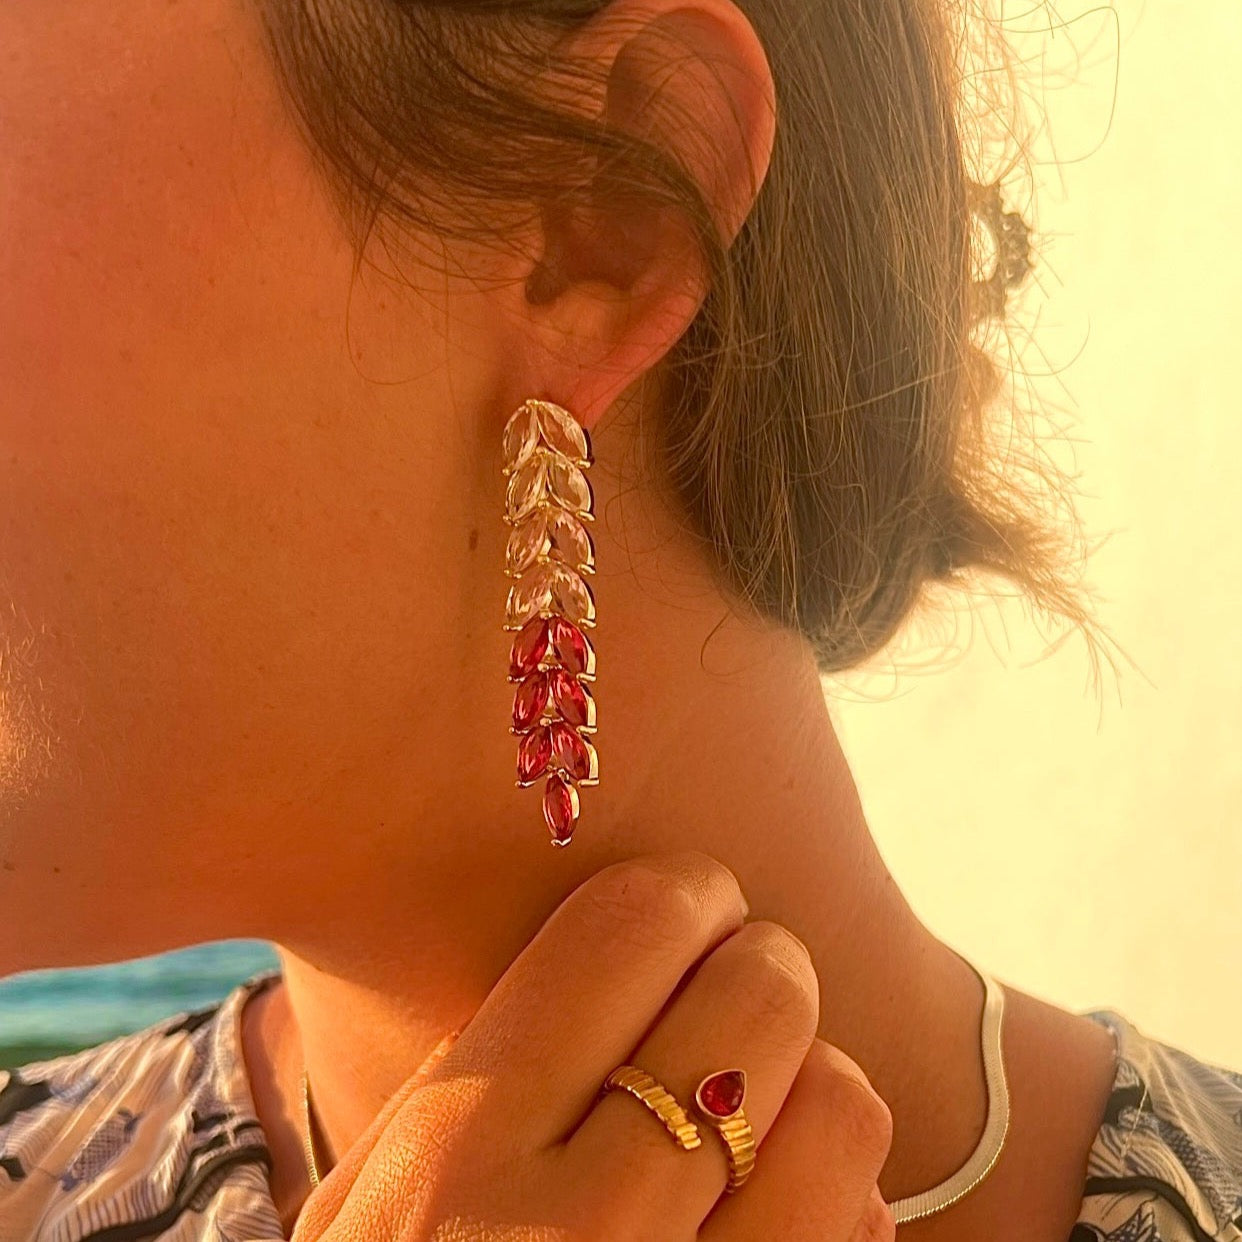 India Jewelled Pink Ombre Drop Earrings